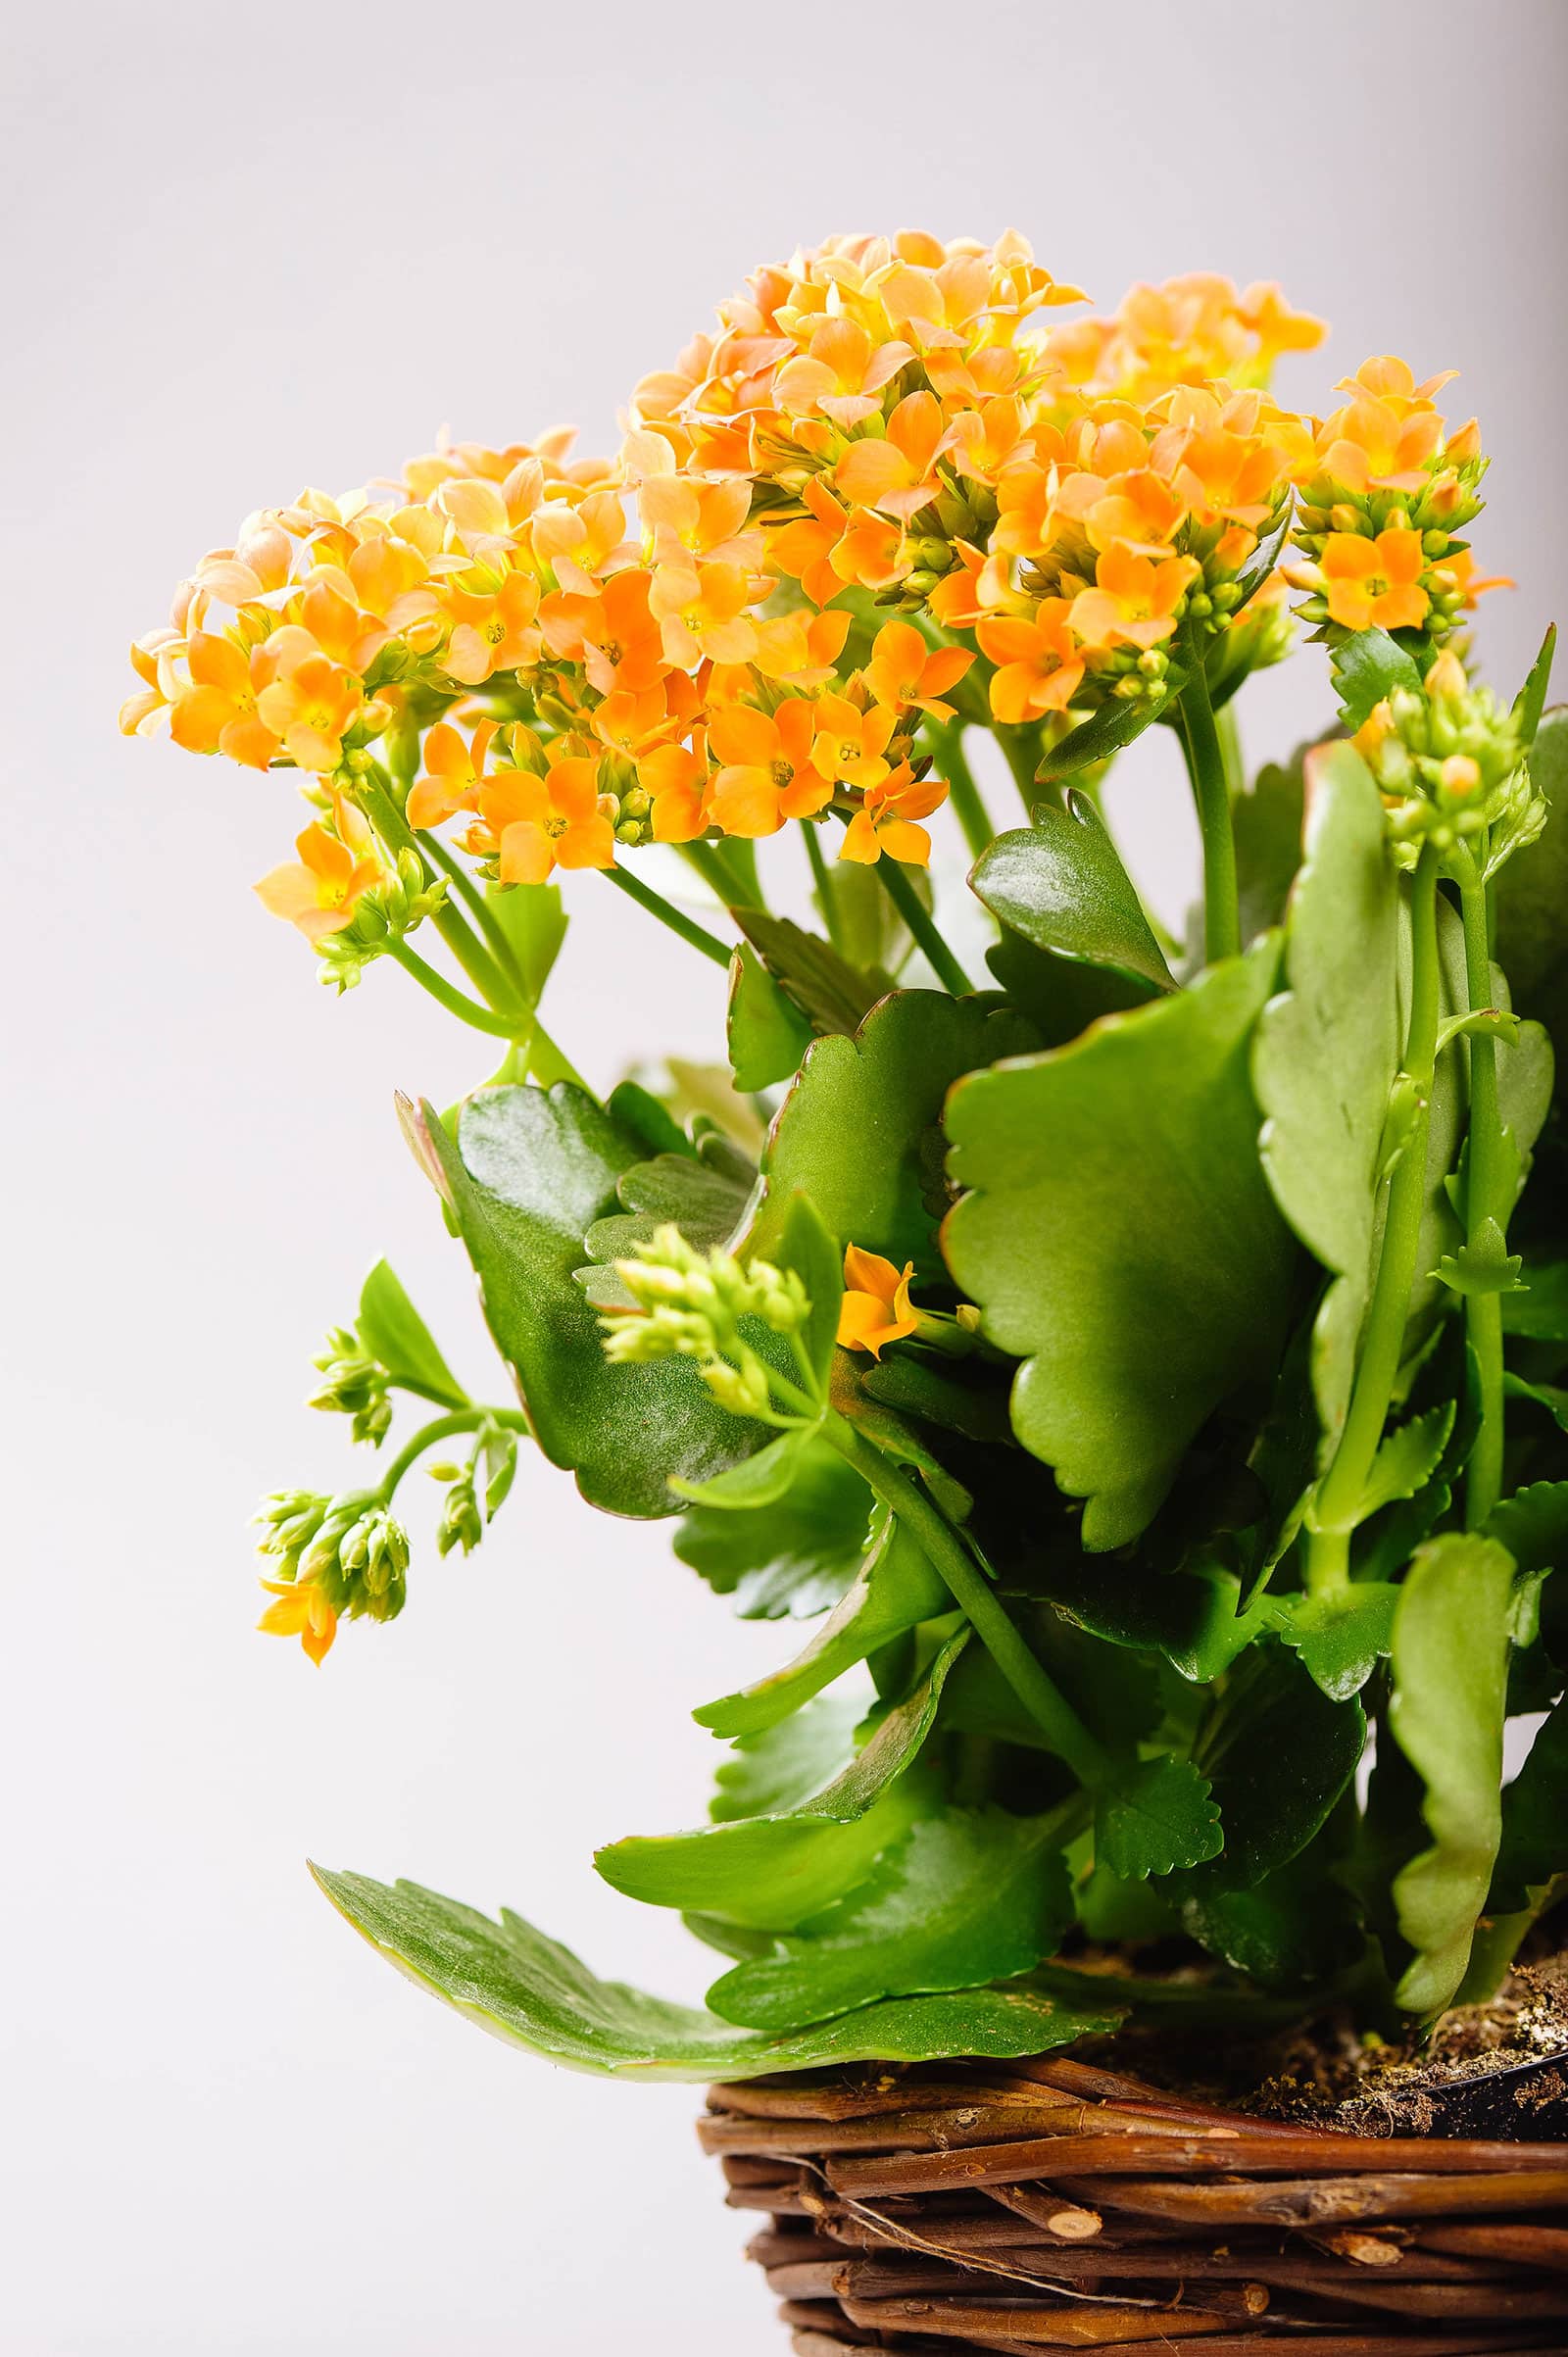 Kalanchoe blossfeldiana in a wicker basket container blooming with yellow flowers